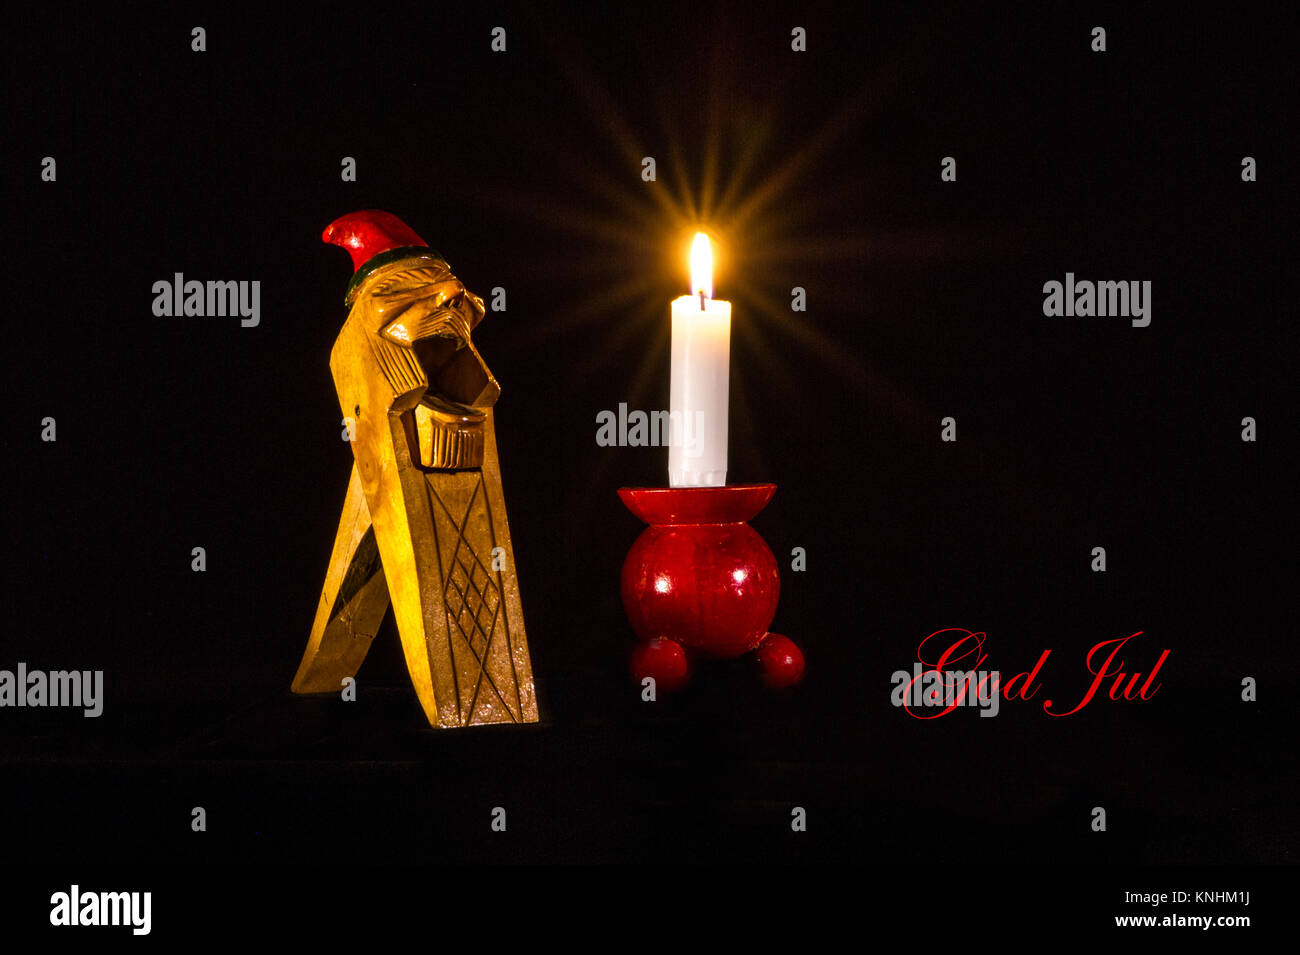 Christmas greetings in Swedish on a Norwegian Gnome Handcarved Wooden Nut Cracker, together with a candlelight on a typical red wooden candlestick. Stock Photo